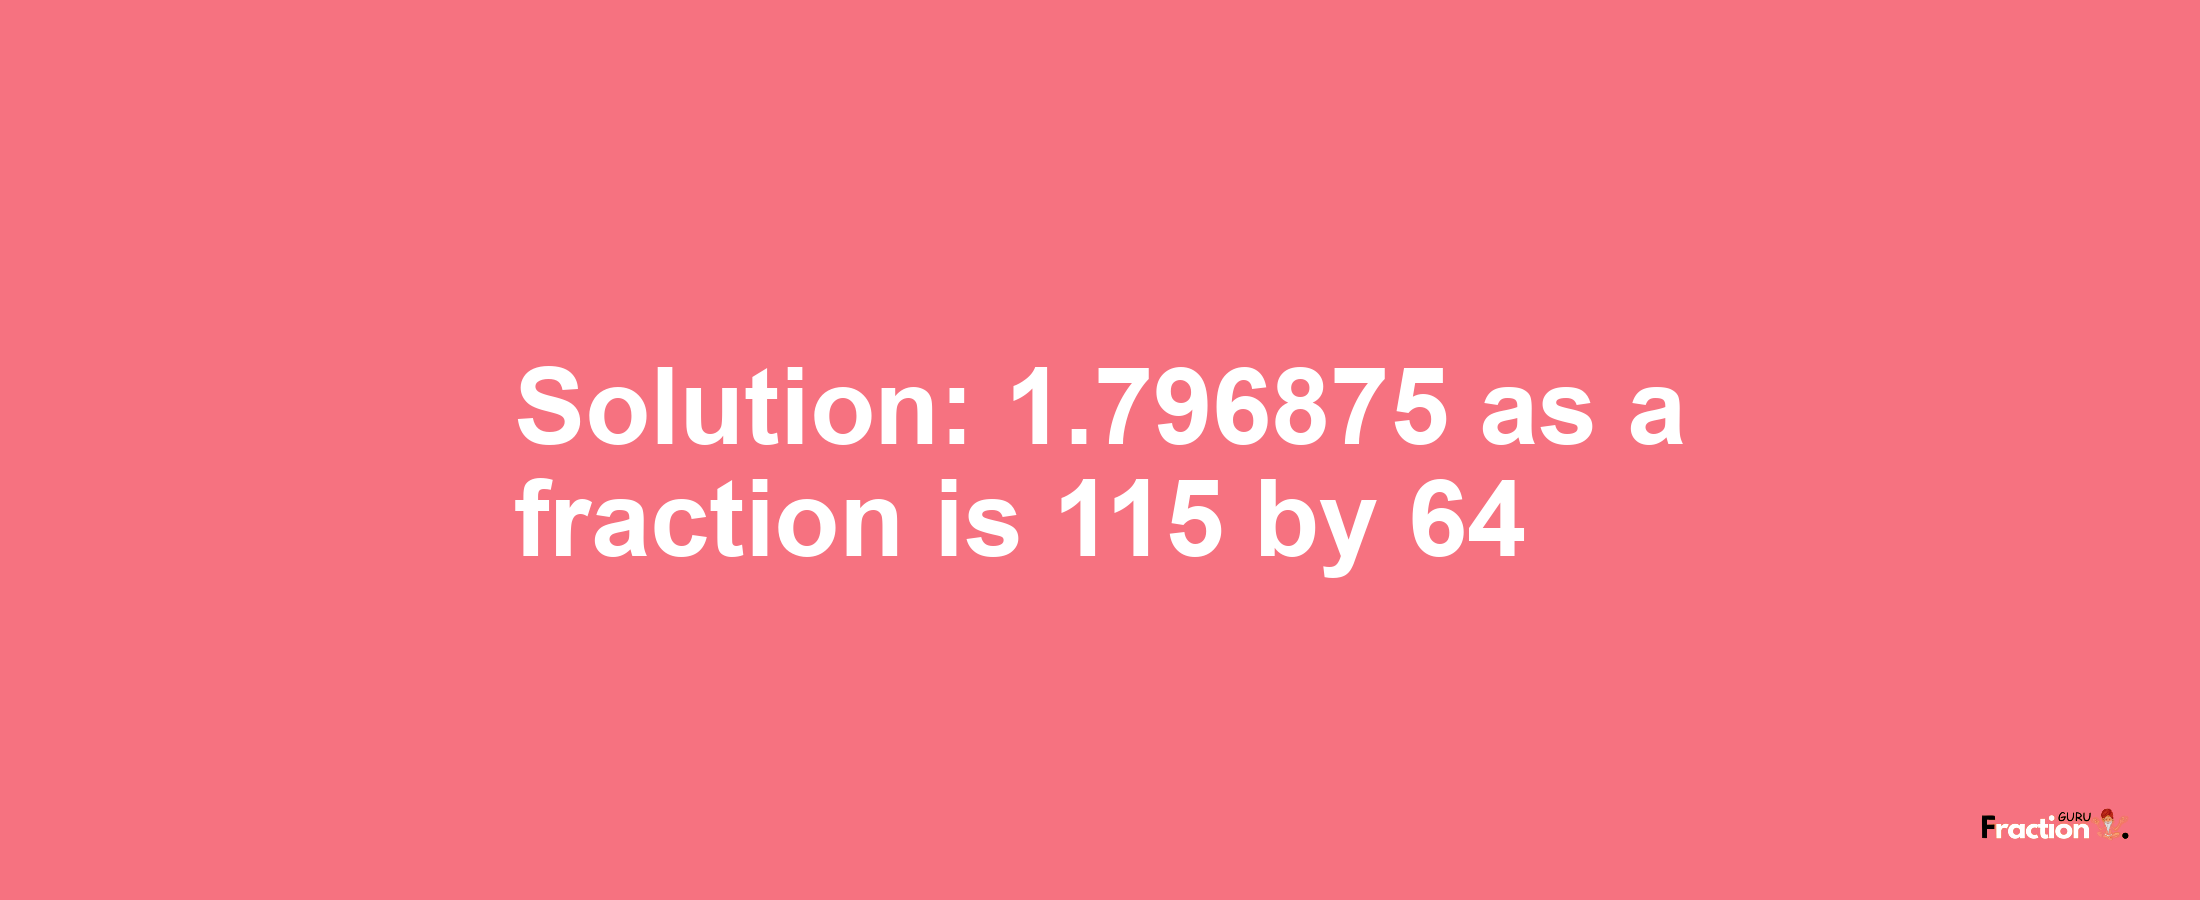 Solution:1.796875 as a fraction is 115/64